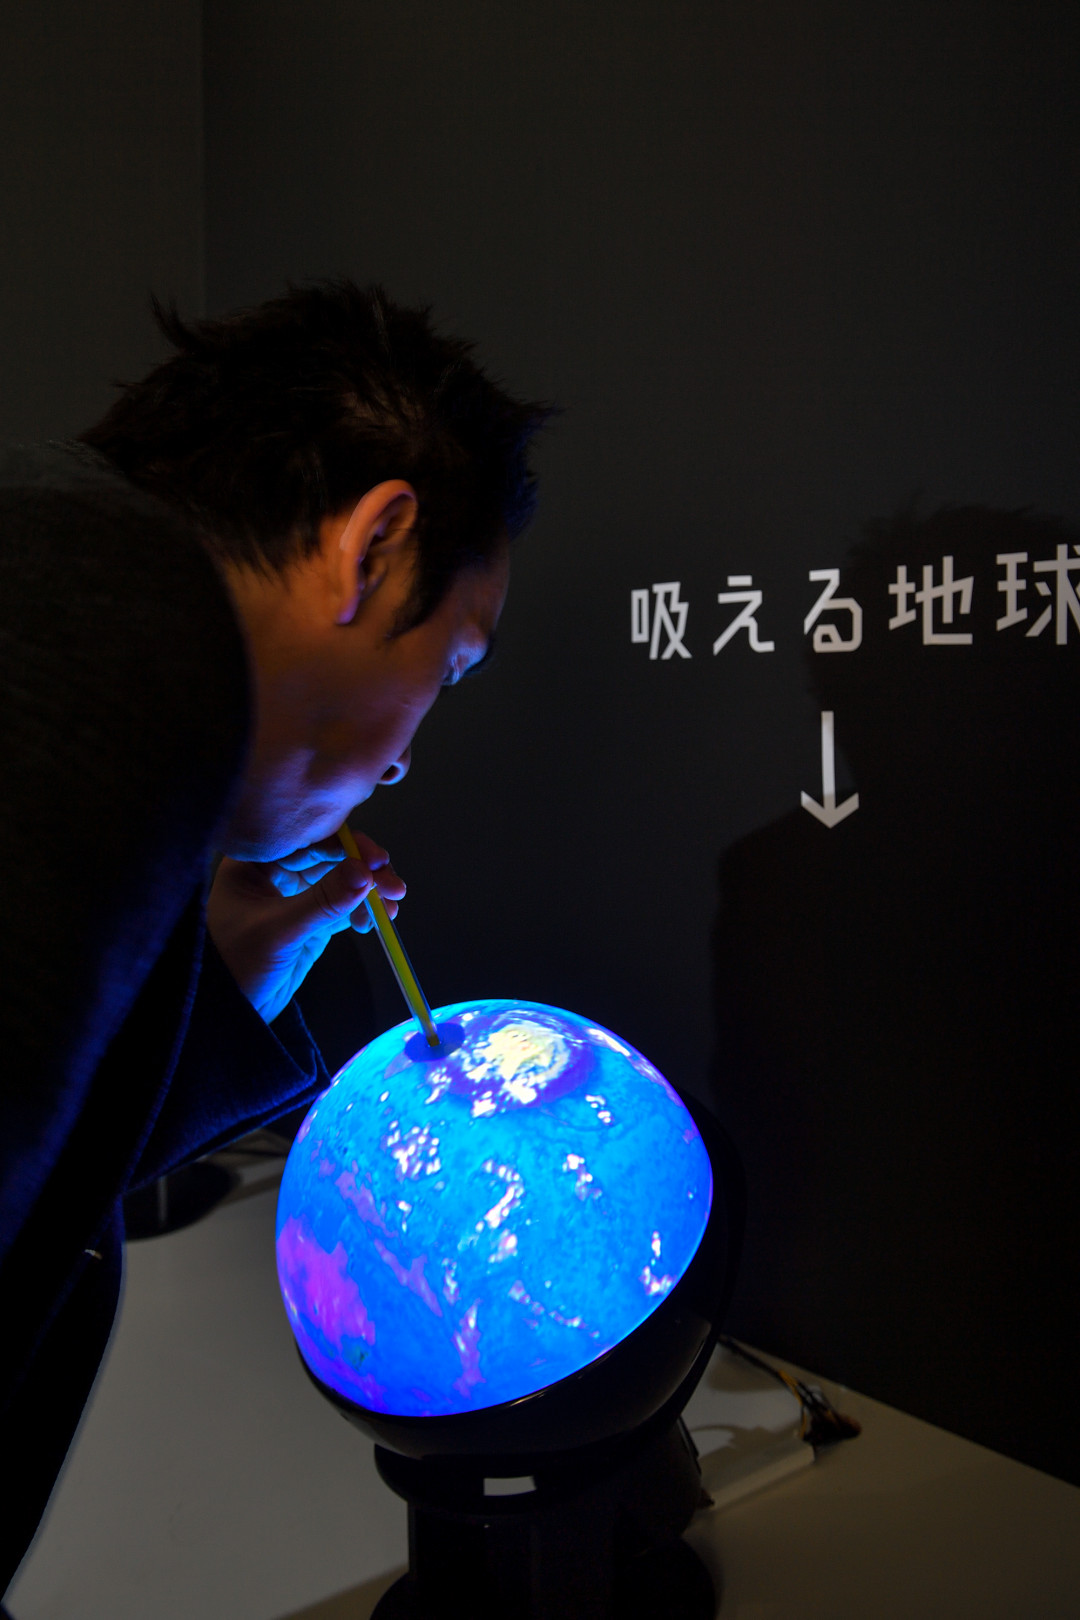 TOKYO, JAPAN - FEBRUARY 08: Suckable Earth by AR3Bros. is displayed at the Media Ambition Tokyo at Roppongi Hills on February 8, 2018 in Tokyo, Japan. The project states "We cannot save the earth, but we may be able to suck on the earth." (Photo by Koki N